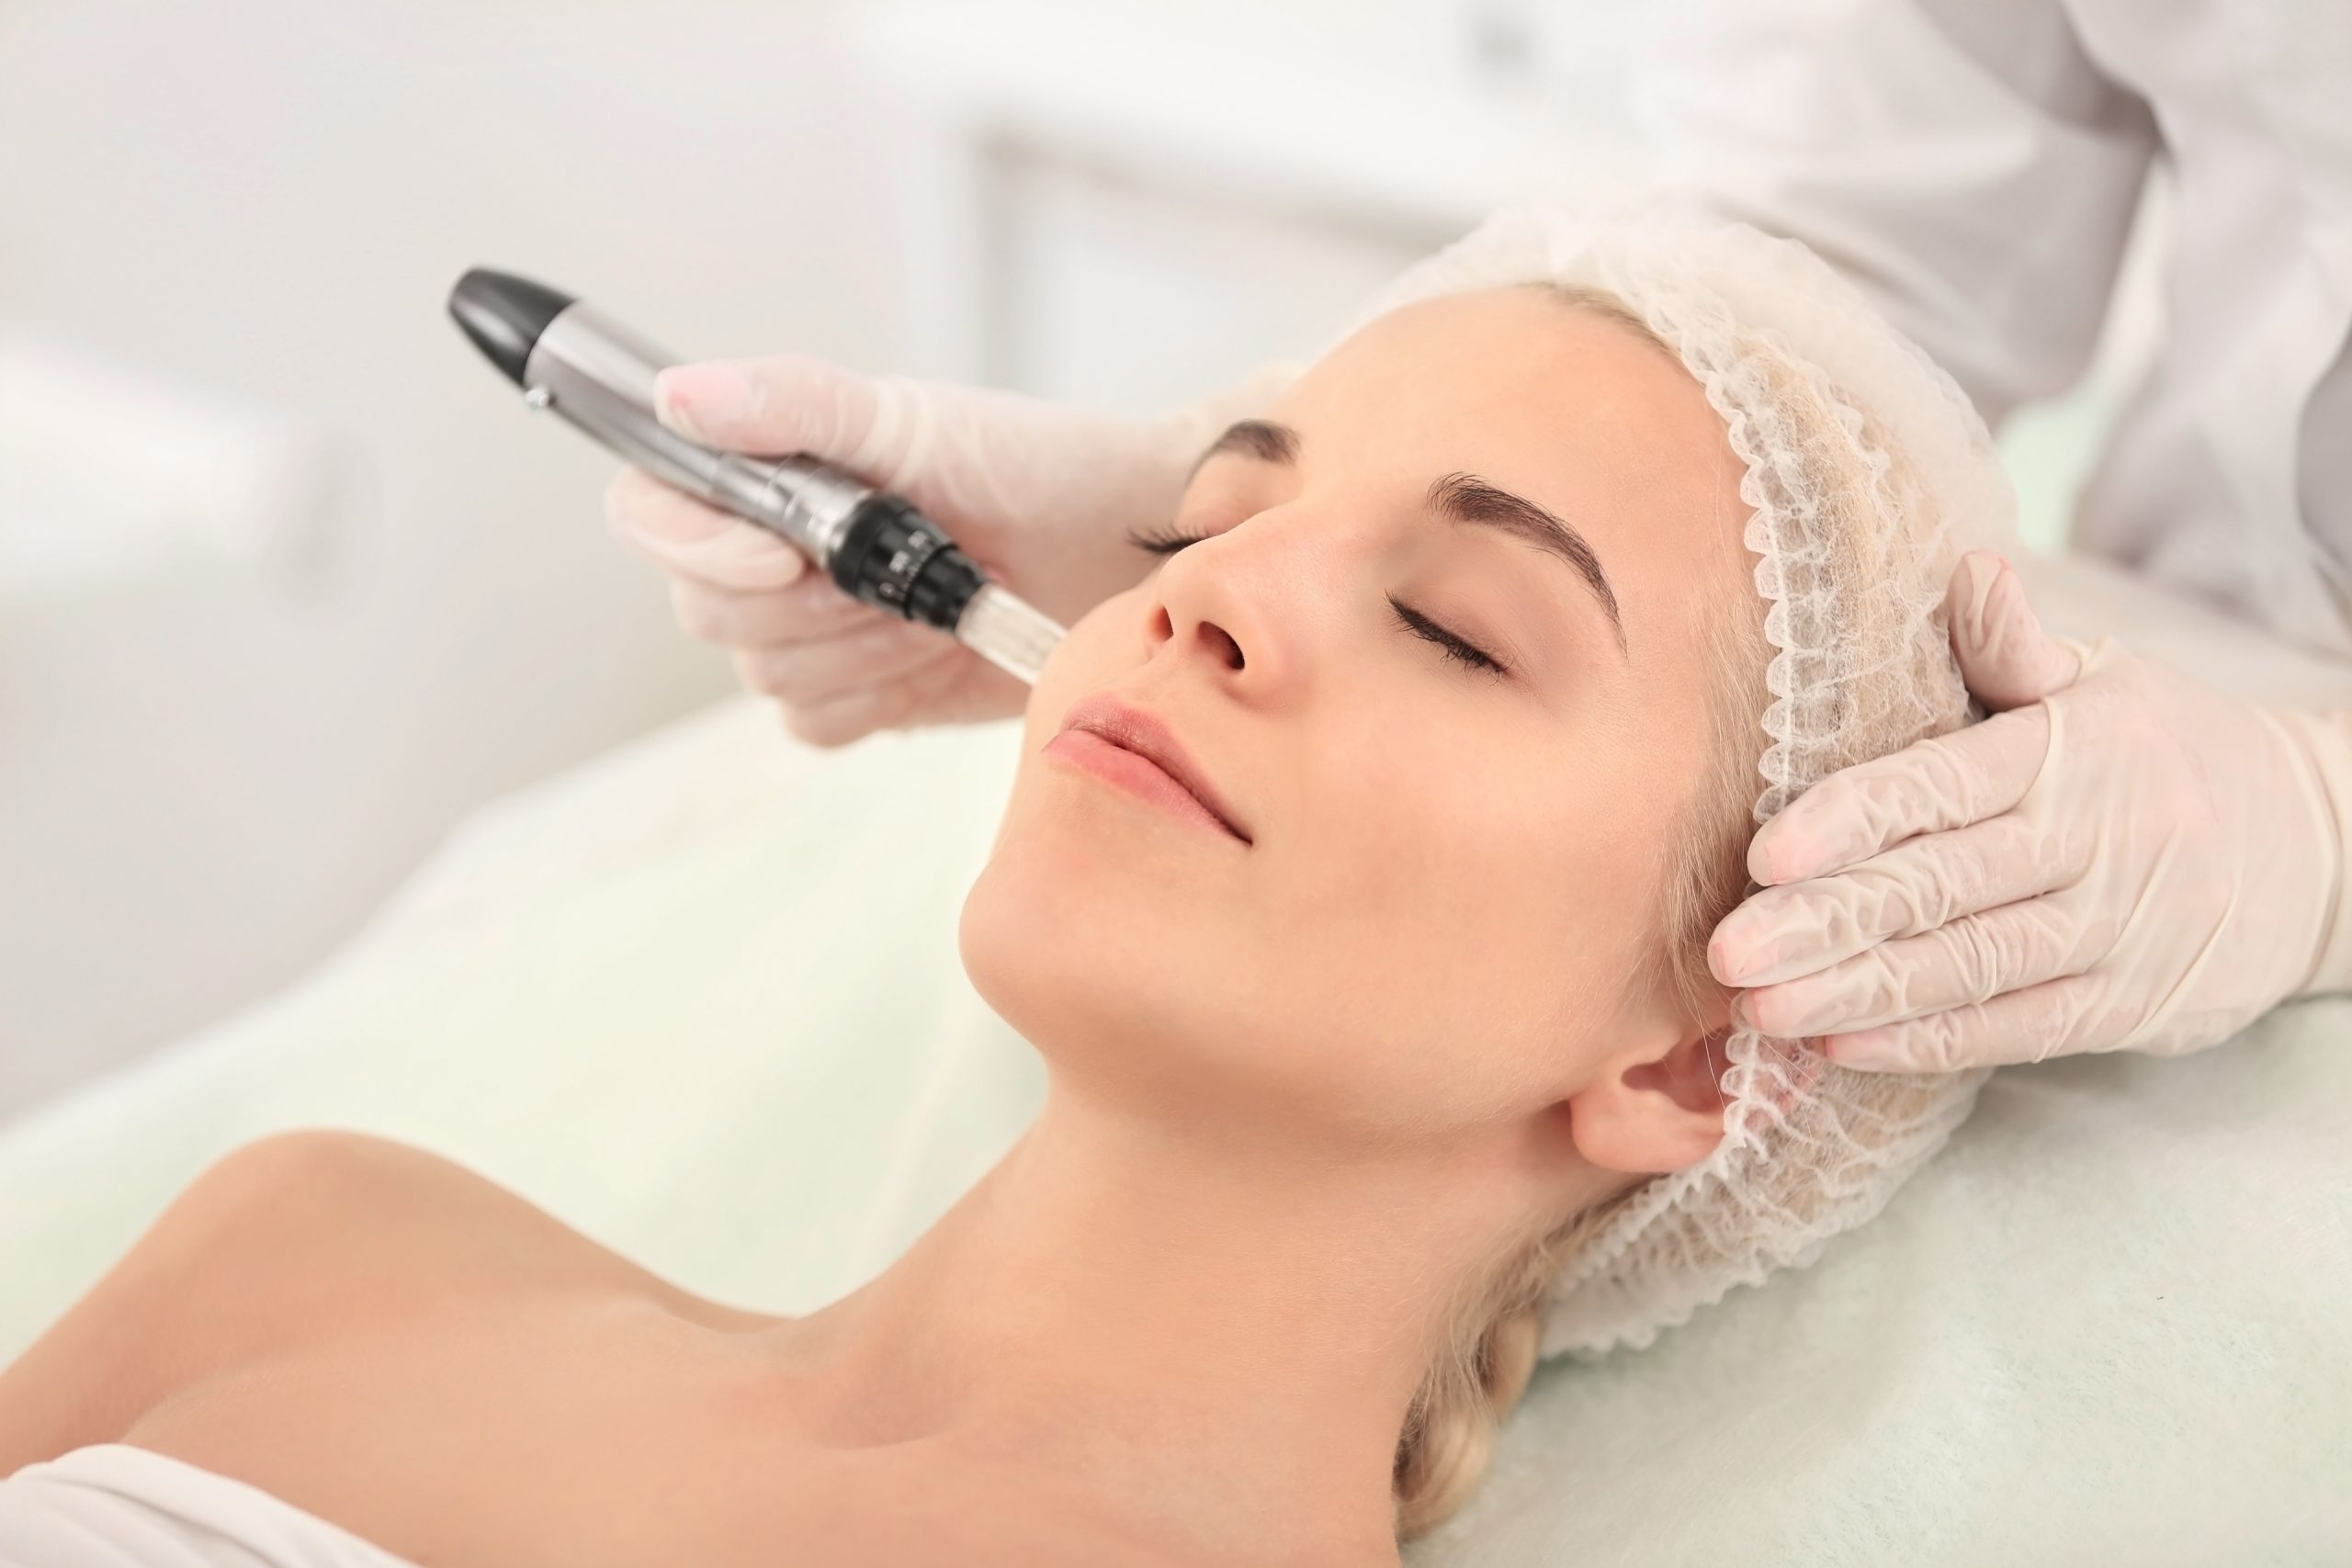 Woman getting a microneedling treatment done